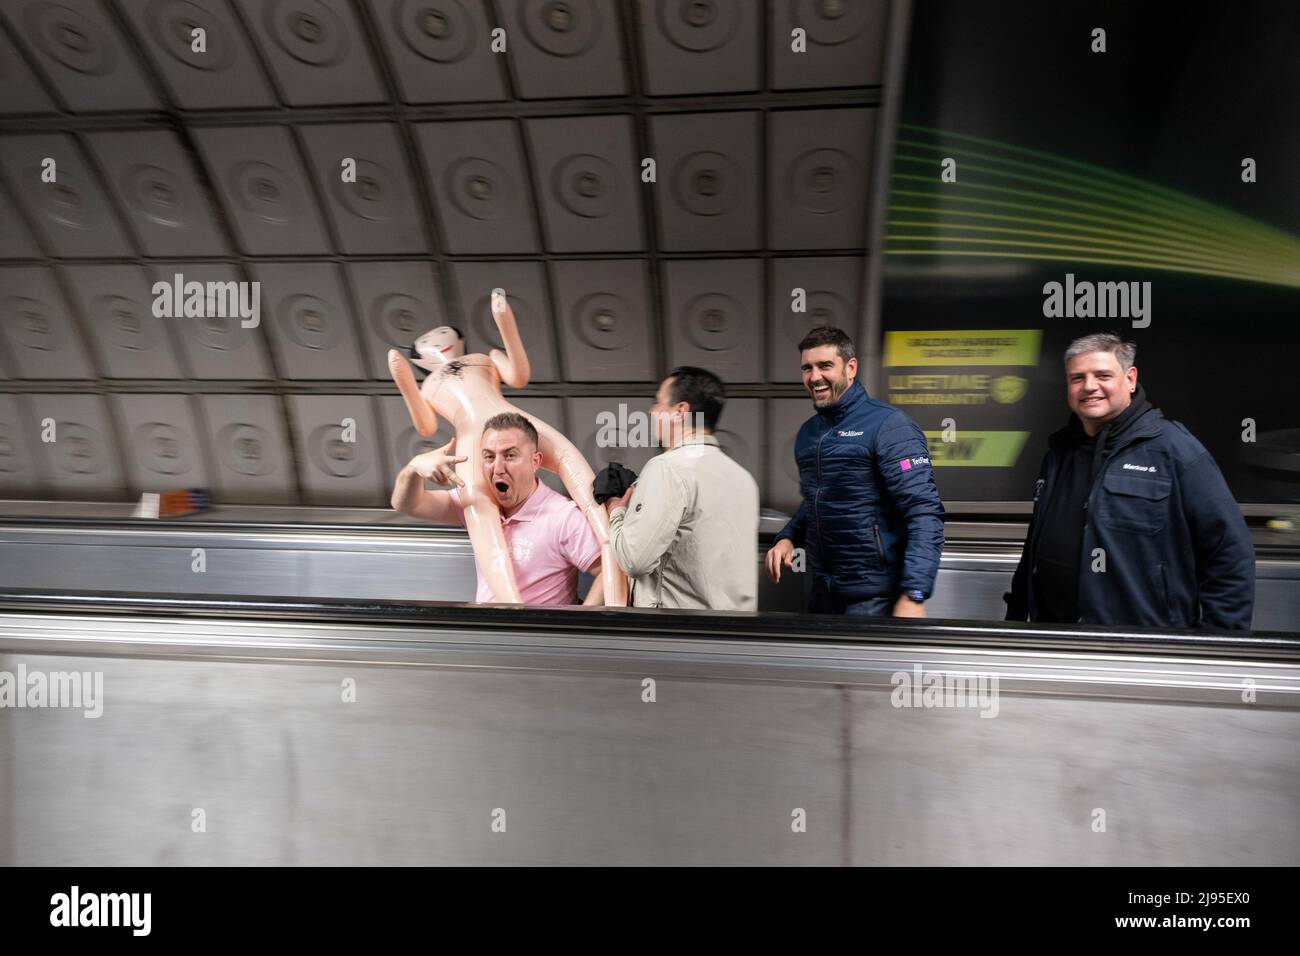 Group of men most likely on a stag party or stag do, travel along the moving walkway at Waterloo station carring a male blow up doll on 30th April 2022 in London, United Kingdom. A bachelor party, also known as a stag weekend, stag do or stag party, or a bucks night is a party held/arranged by the man who is shortly to enter marriage. Stock Photo